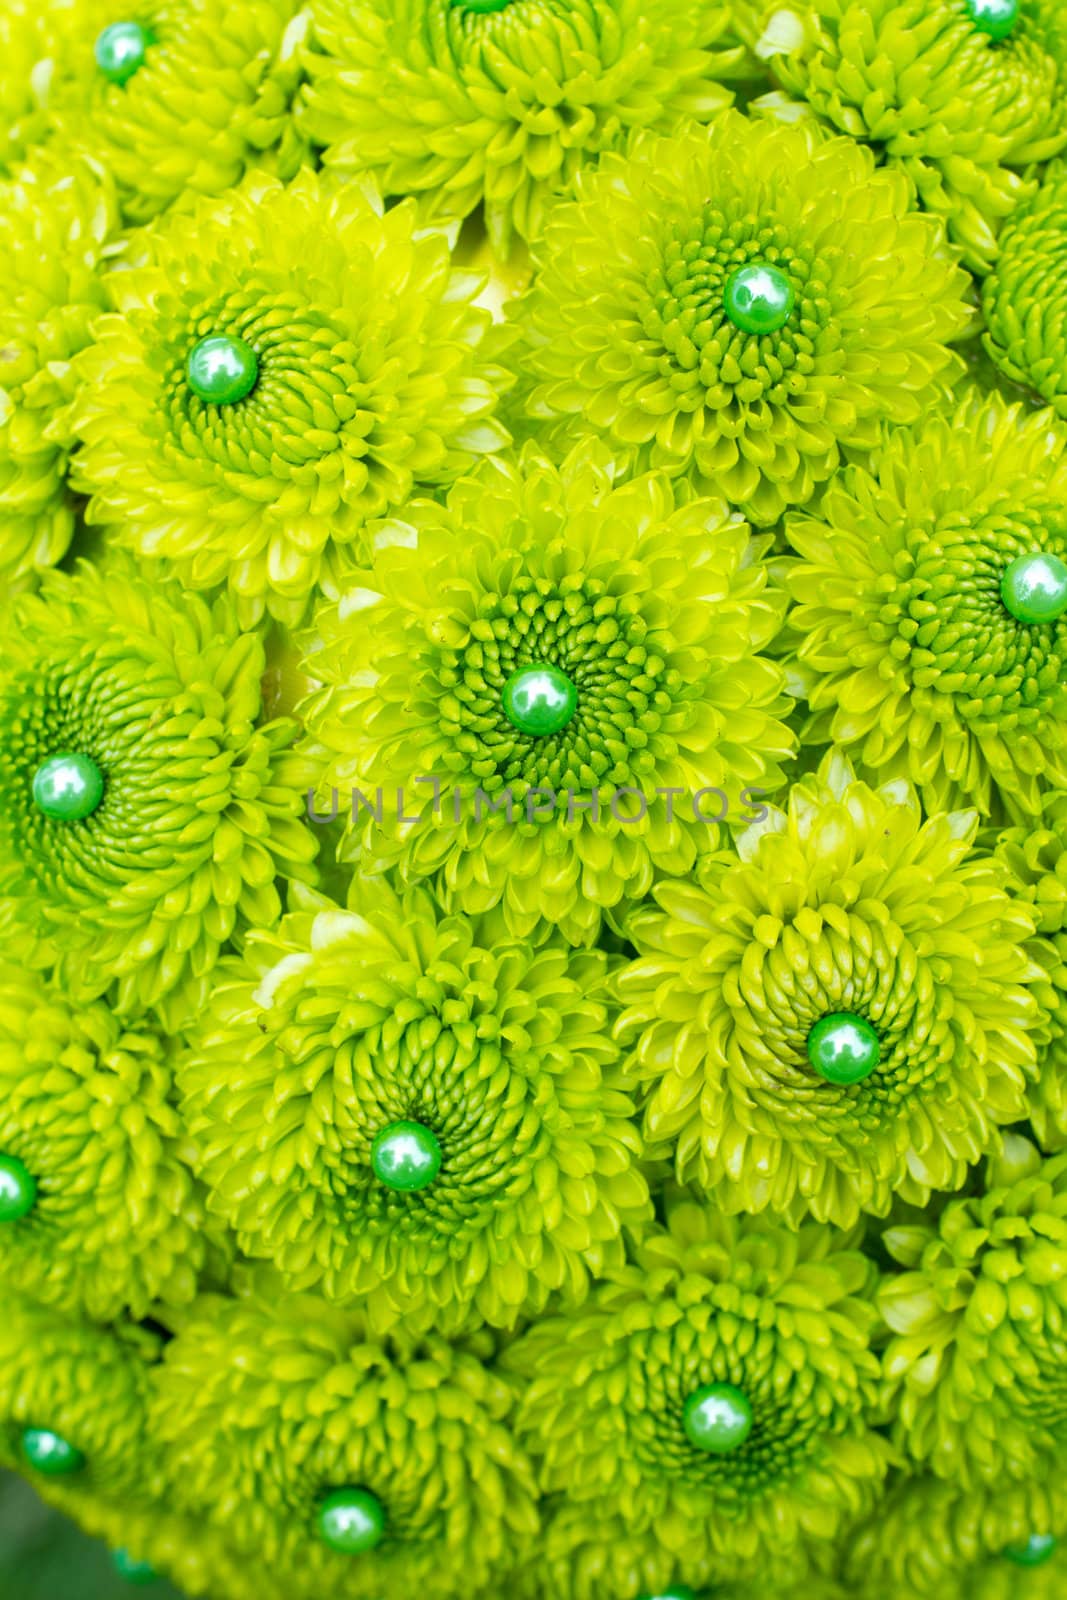 Green flowers are placed together with pins to create thie unique floral abstract.